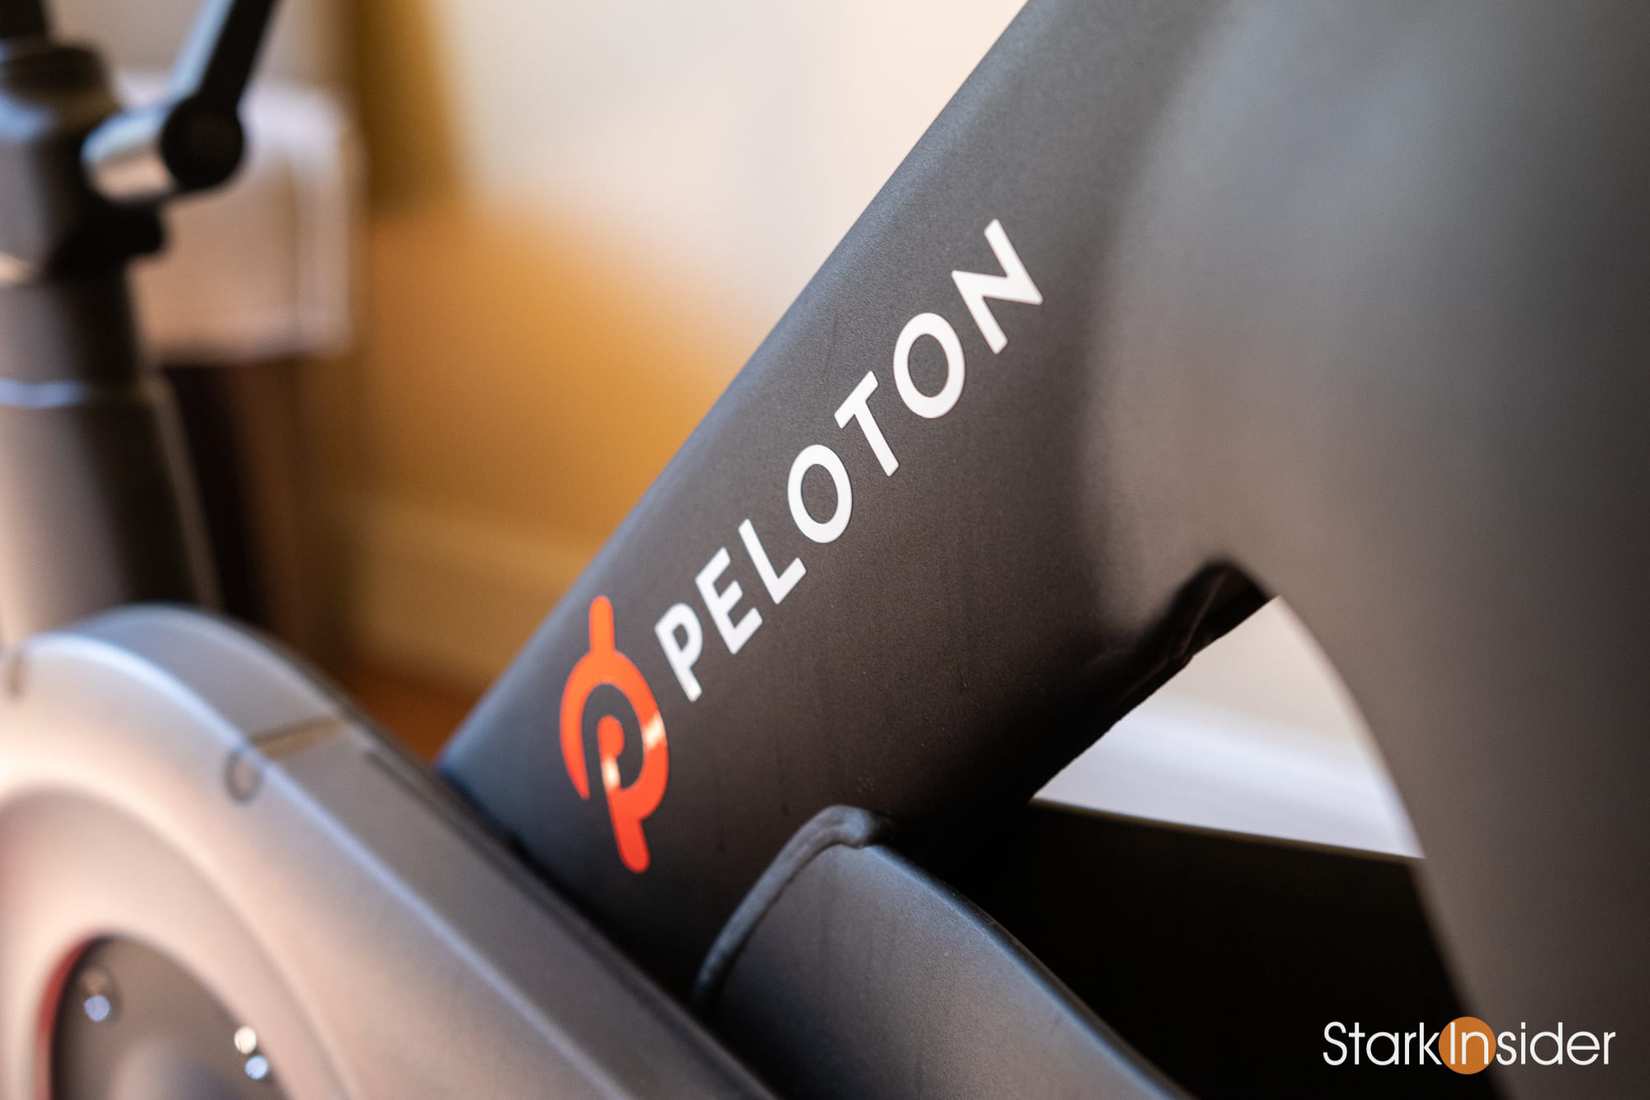 Peloton to relaunch its brand, focus on subscriptions